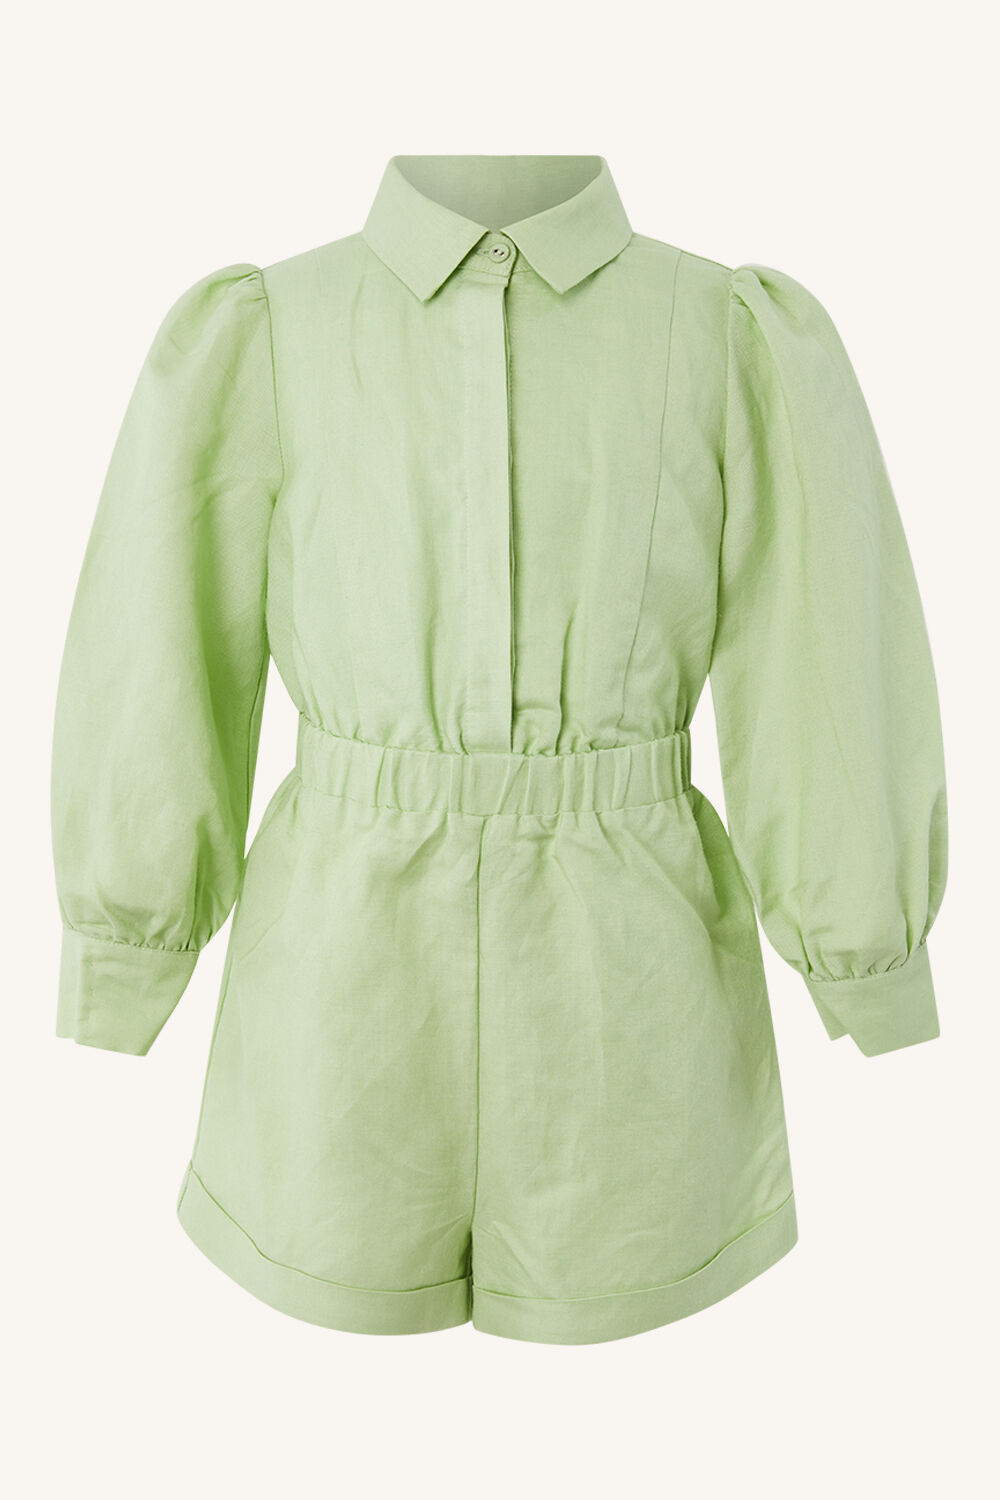 GIRLS GISELLA PLAYSUIT in colour MINT